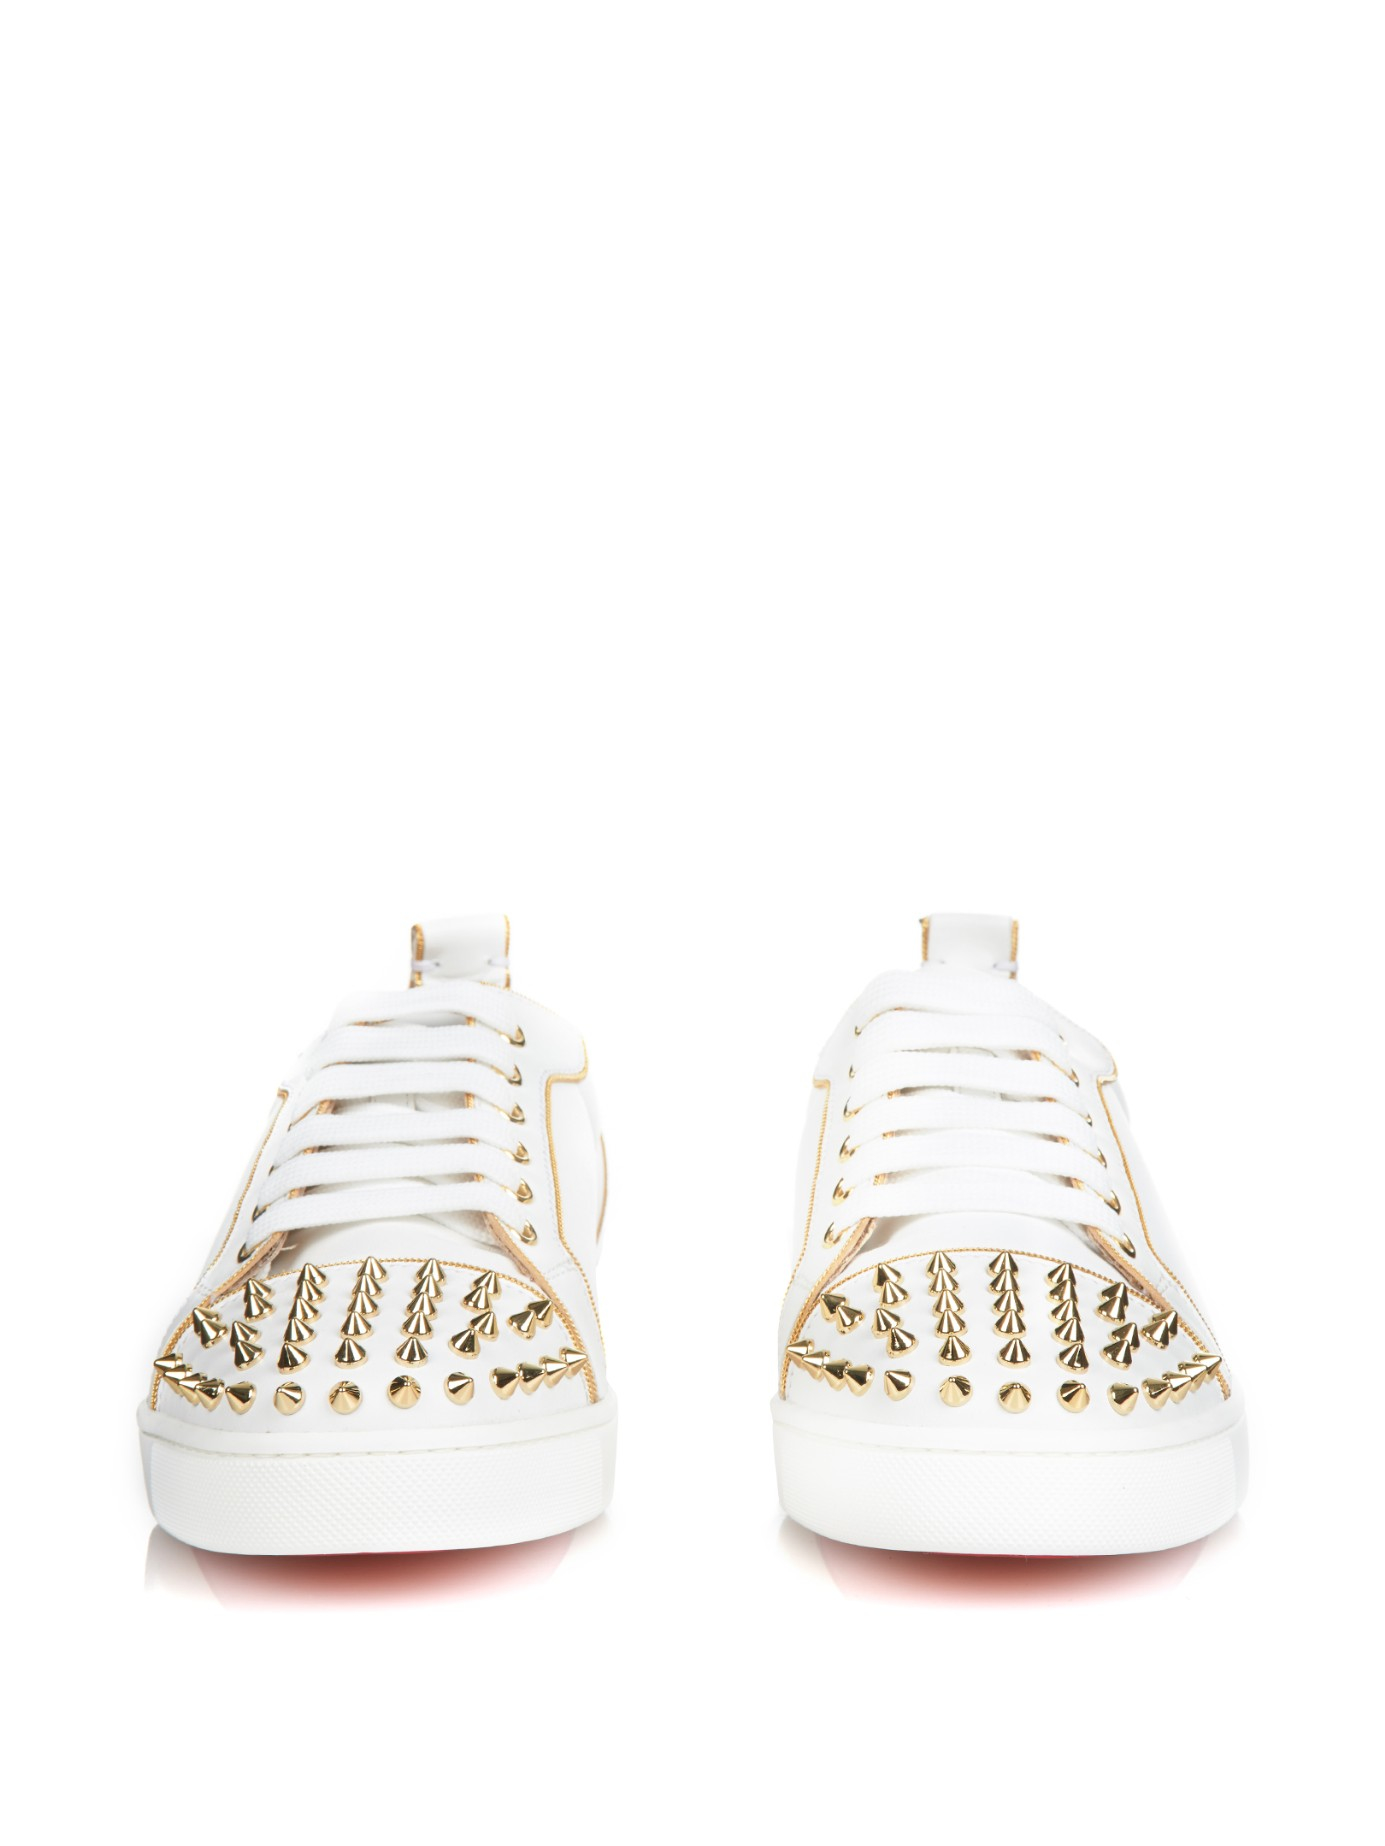 christian louboutin round-toe sneakers White leather spiked studs ...  